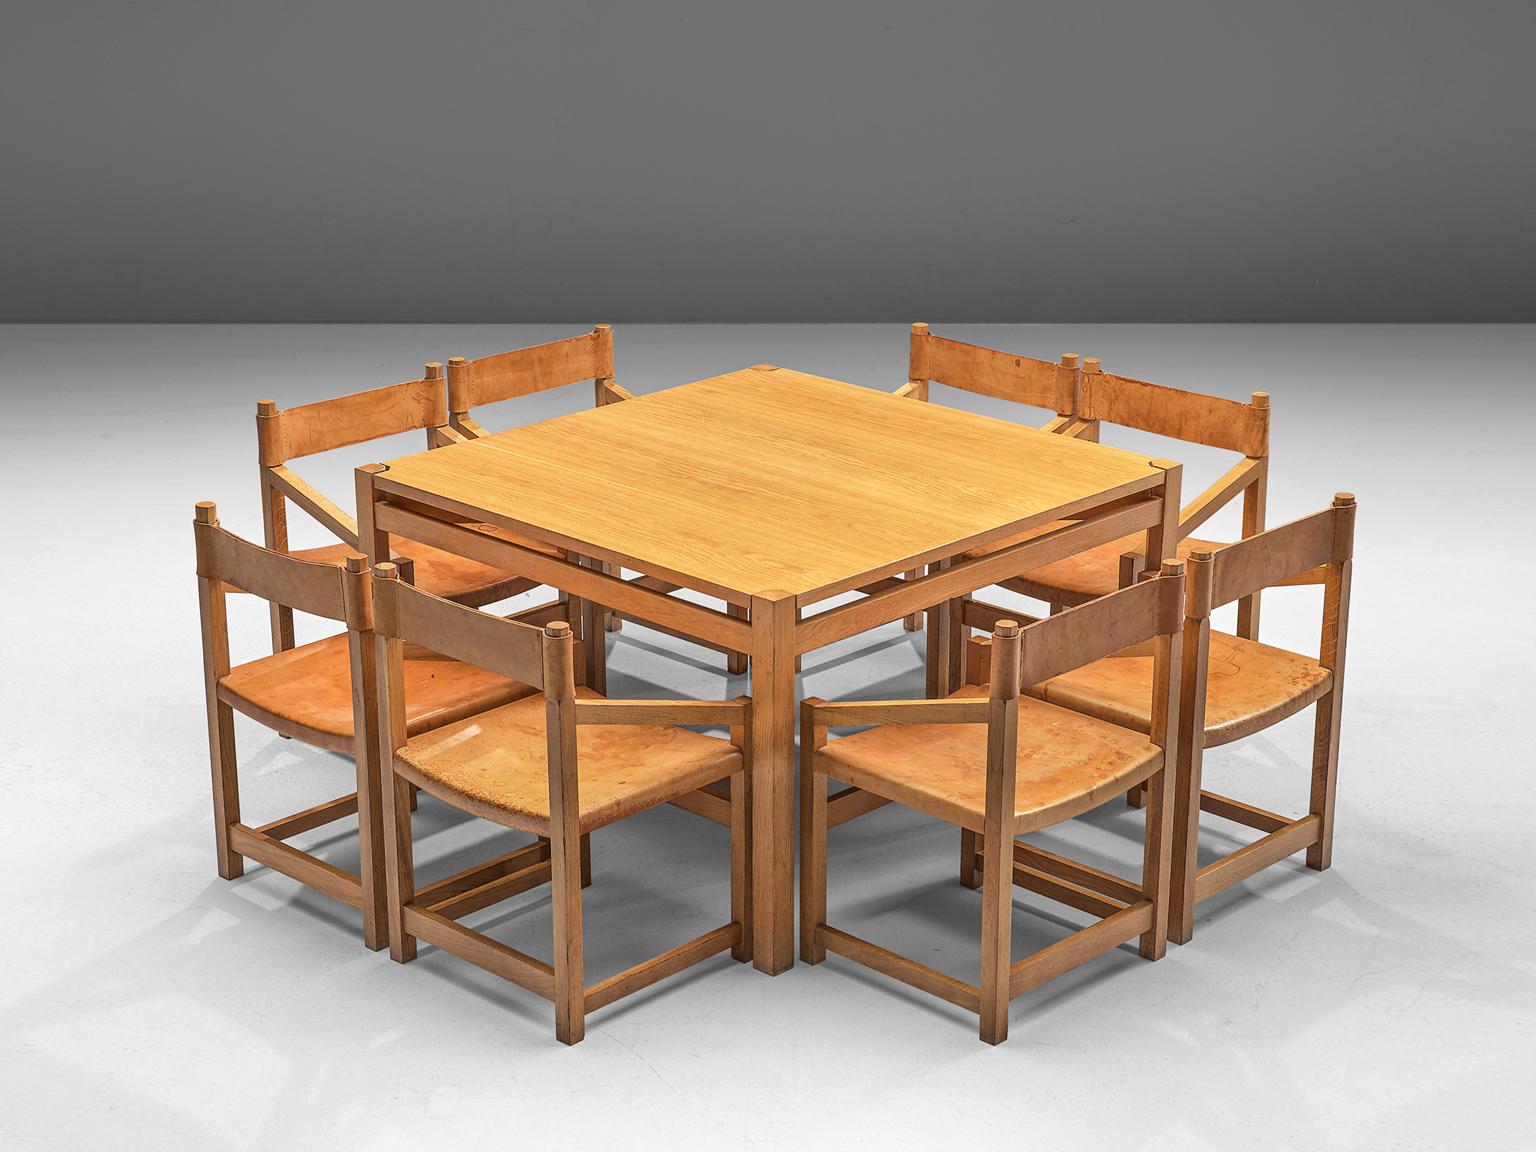 Casablanca Jordi Muntañola, dining set with table and 8 armchairs, pine and leather, Spain, 1979.

This set of eight armchairs from Spain is purist and modest. The chairs feature an architectural frame, of which the combination with diagonal